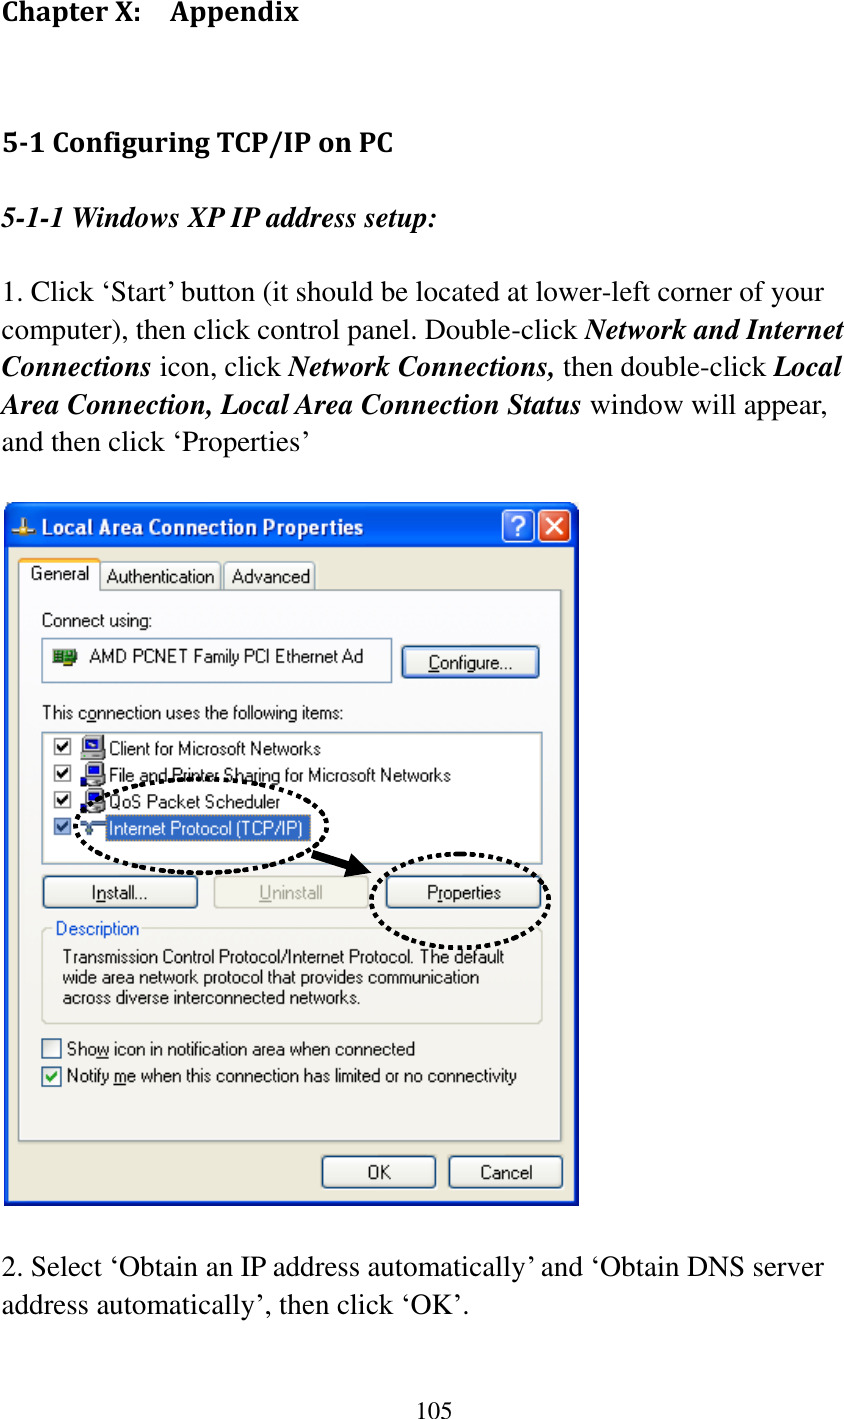 105  Chapter X:    Appendix 5-1 Configuring TCP/IP on PC 5-1-1 Windows XP IP address setup:  1. Click „Start‟ button (it should be located at lower-left corner of your computer), then click control panel. Double-click Network and Internet Connections icon, click Network Connections, then double-click Local Area Connection, Local Area Connection Status window will appear, and then click „Properties‟    2. Select „Obtain an IP address automatically‟ and „Obtain DNS server address automatically‟, then click „OK‟. 